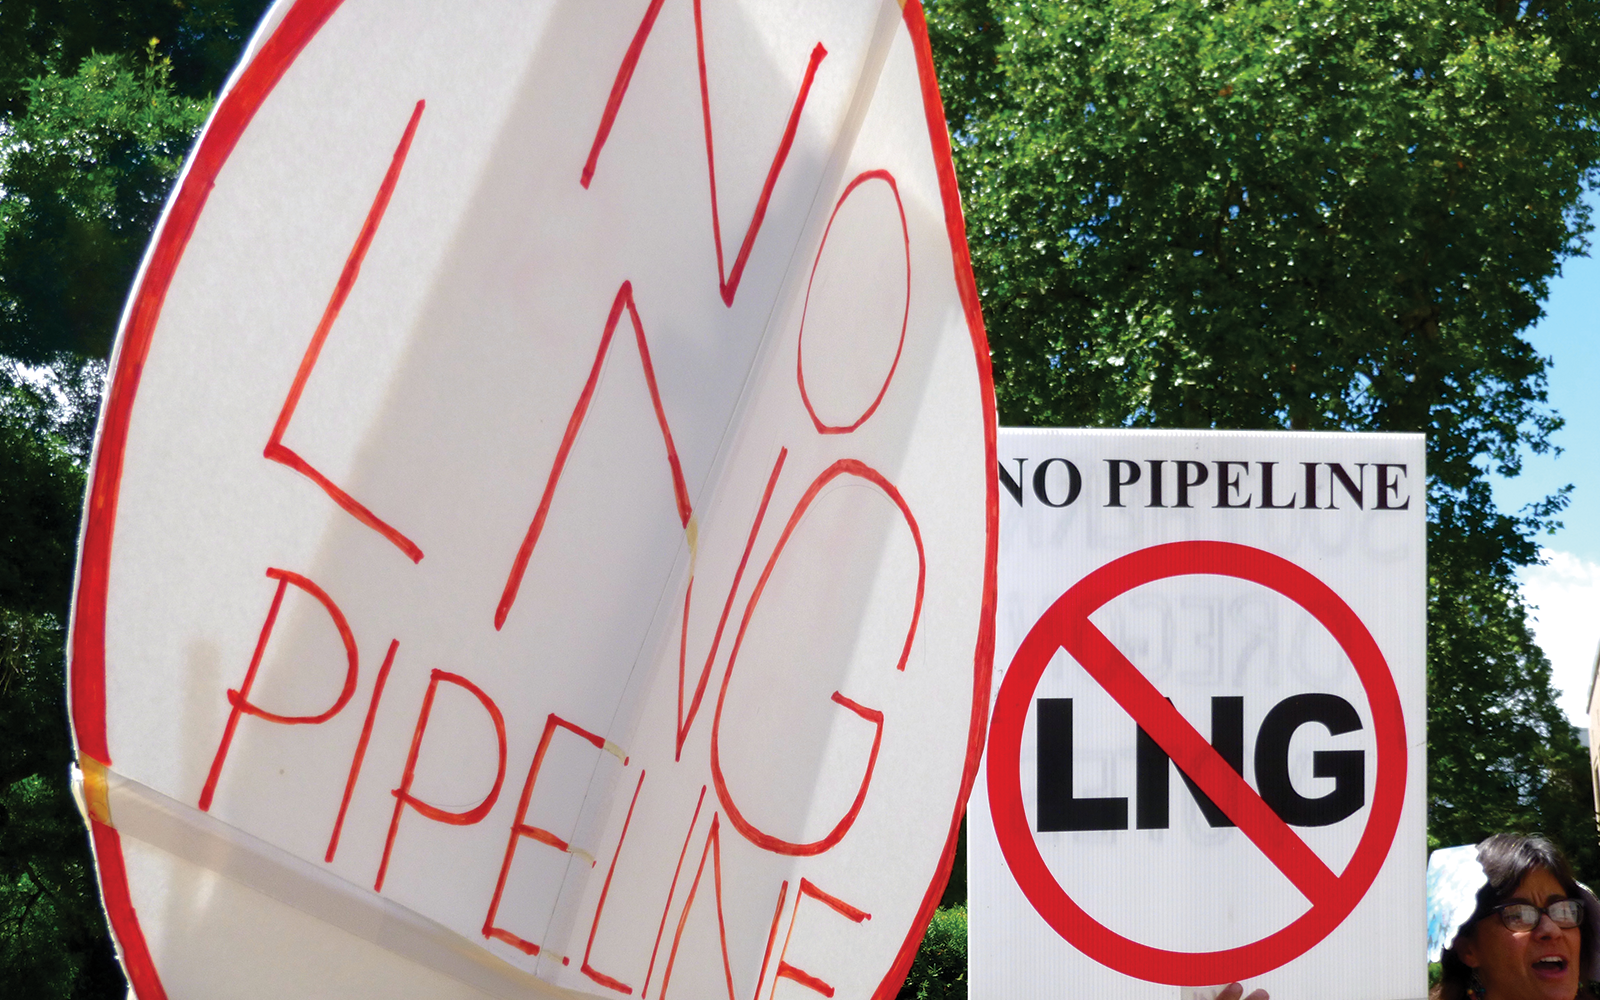 Press Release: Landowners and Organizations Challenge Federal Green Light for Pipeline